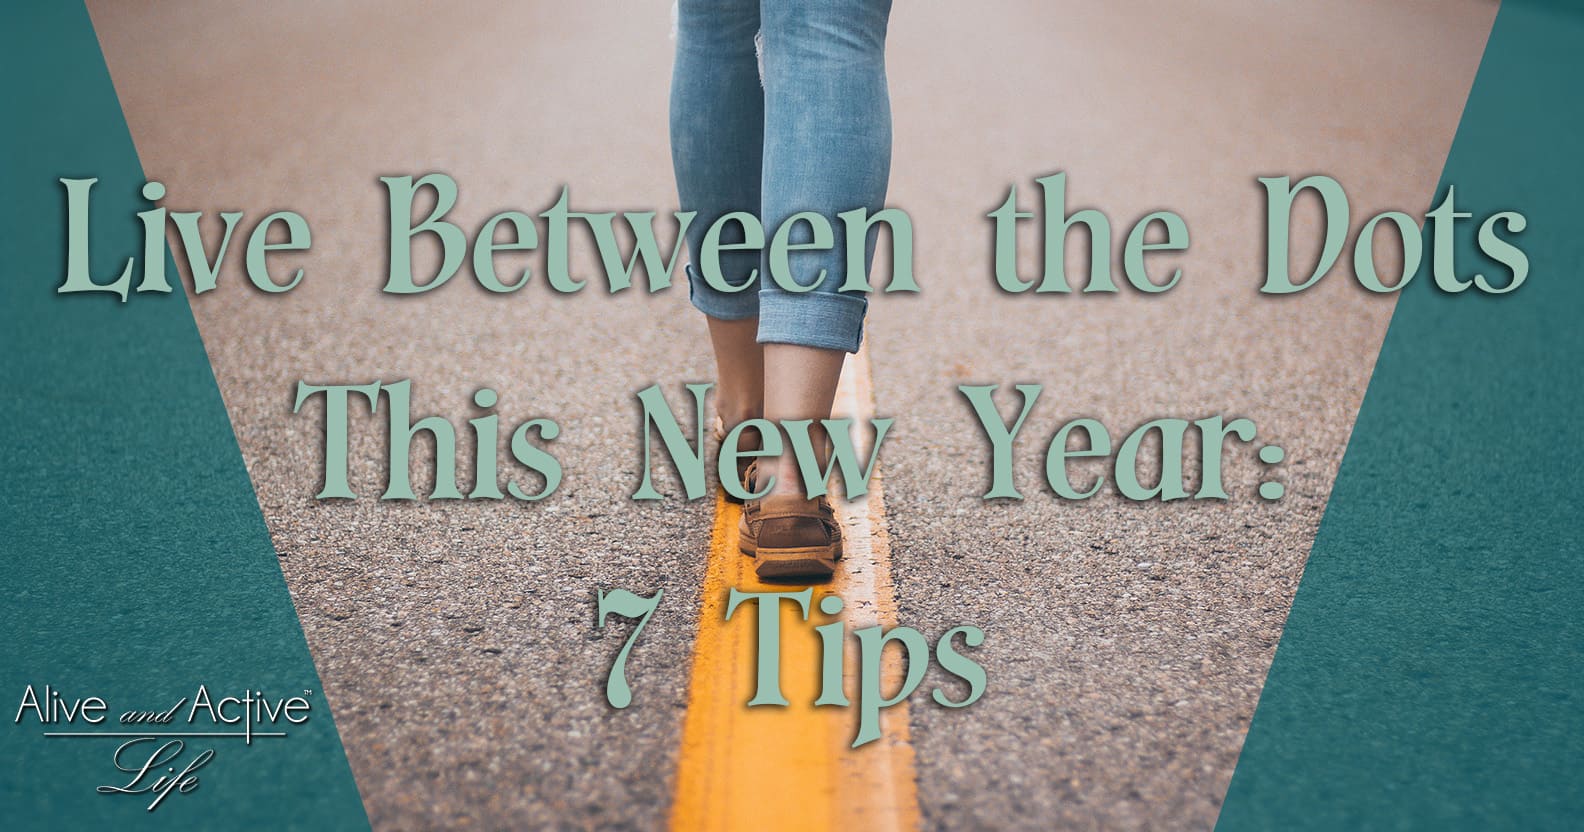 Live Between the Dots This New Year: 7 Tips